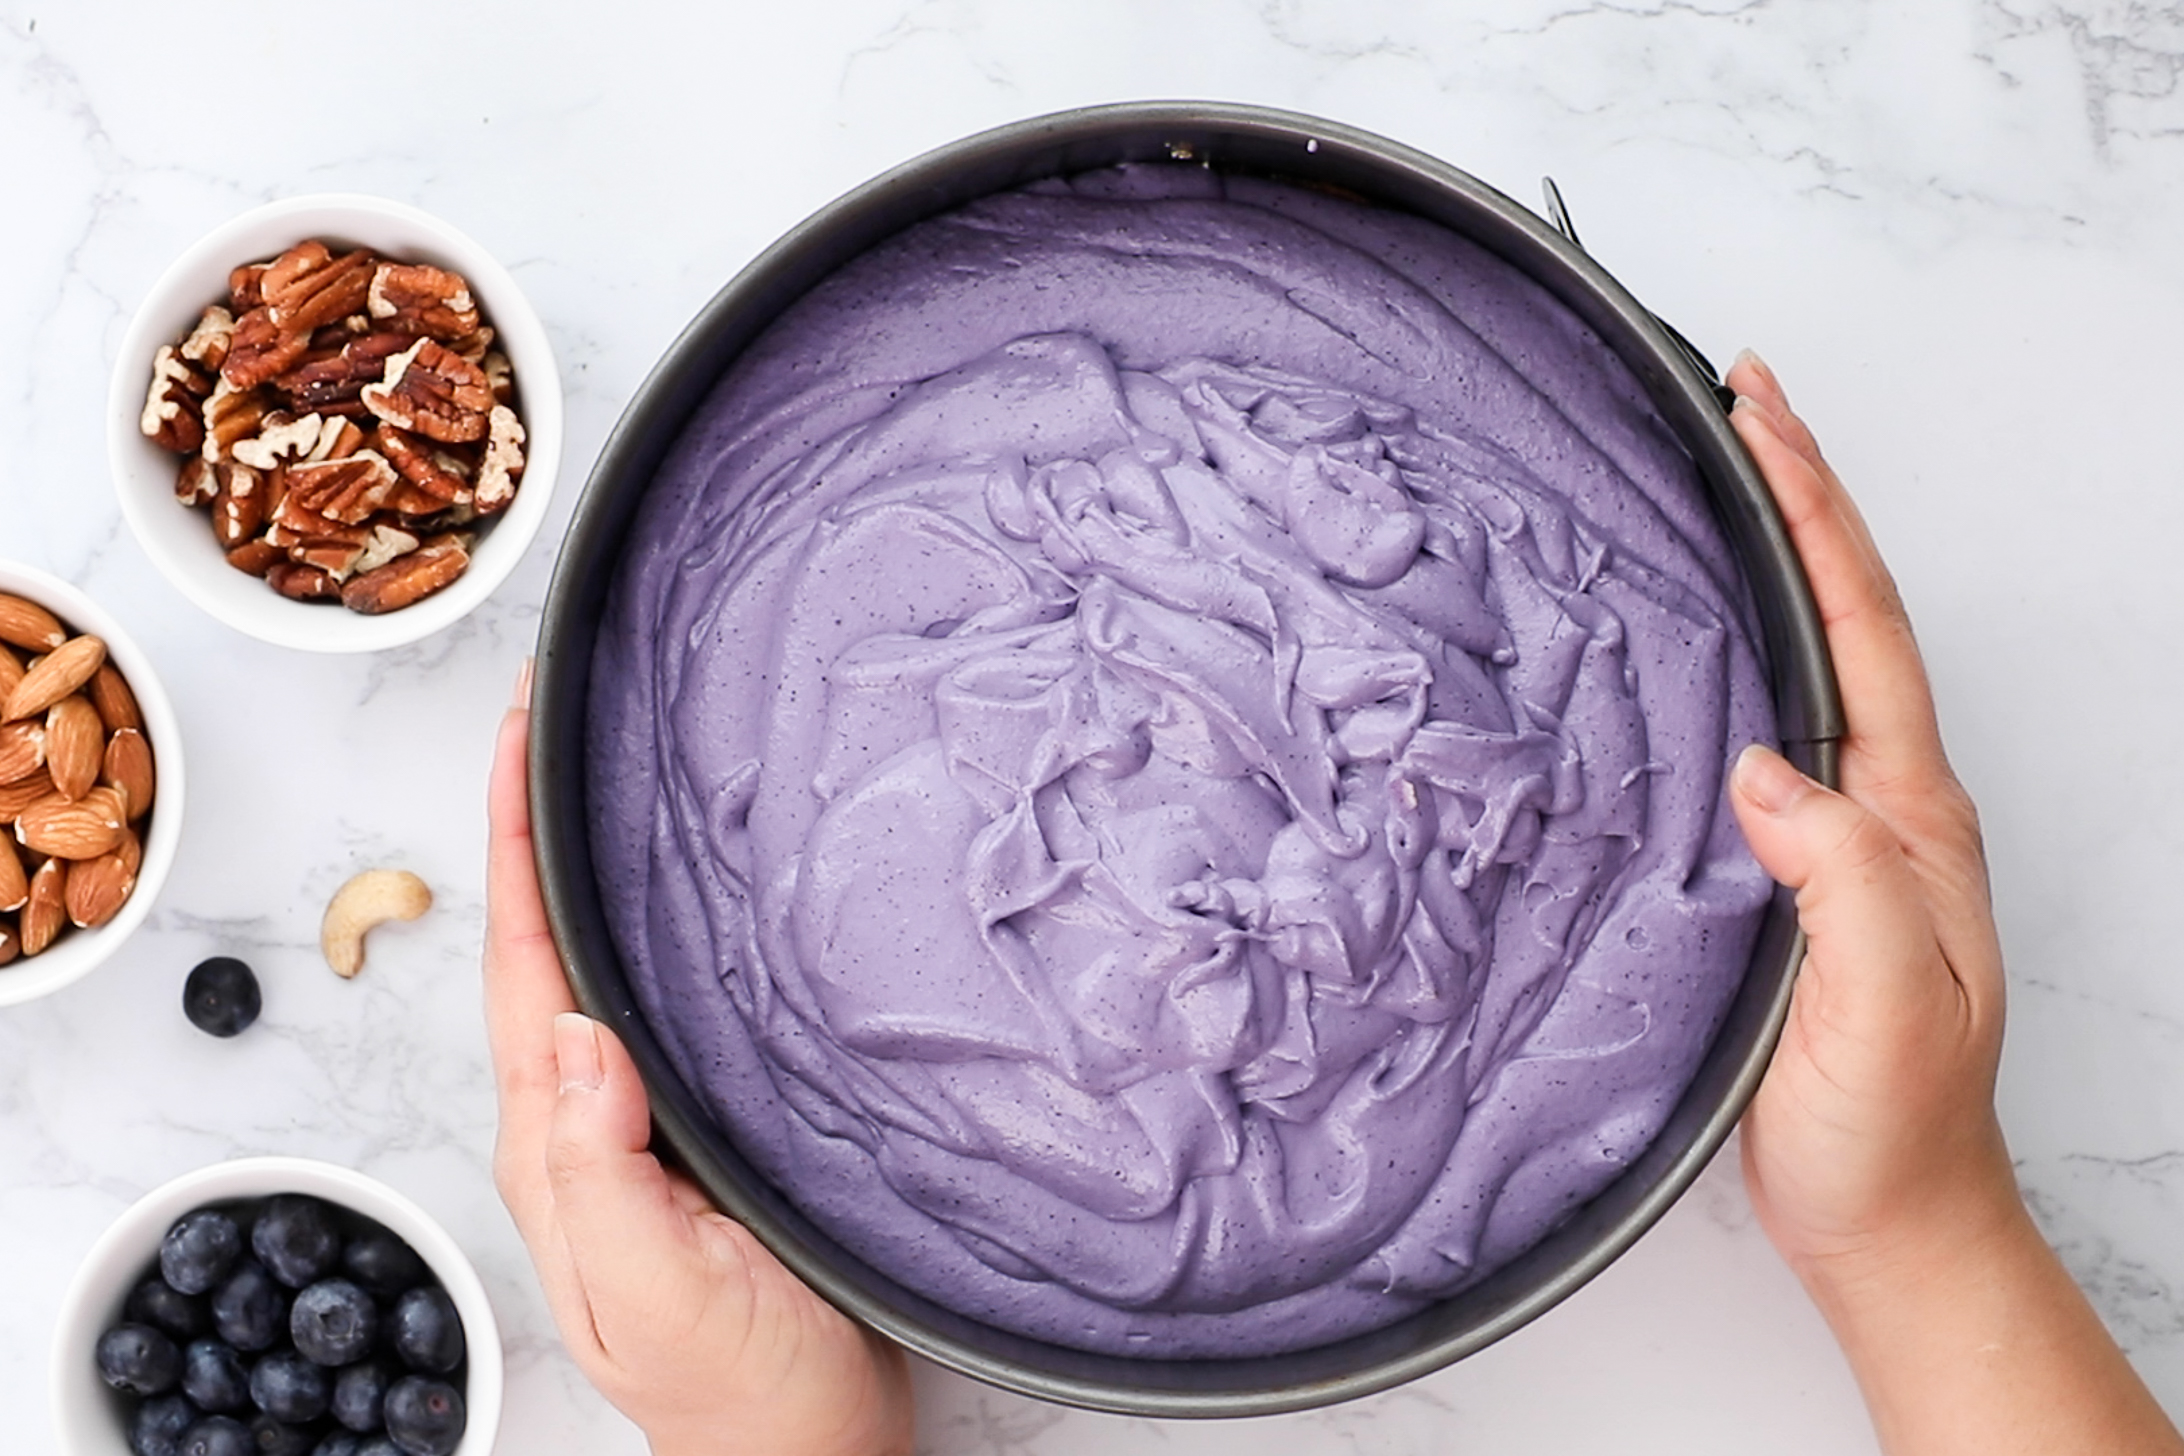 Top-down image featuring hands holding a cake pan filled with creamy blueberry filling, accompanied by ramekins of nuts and berries nearby.